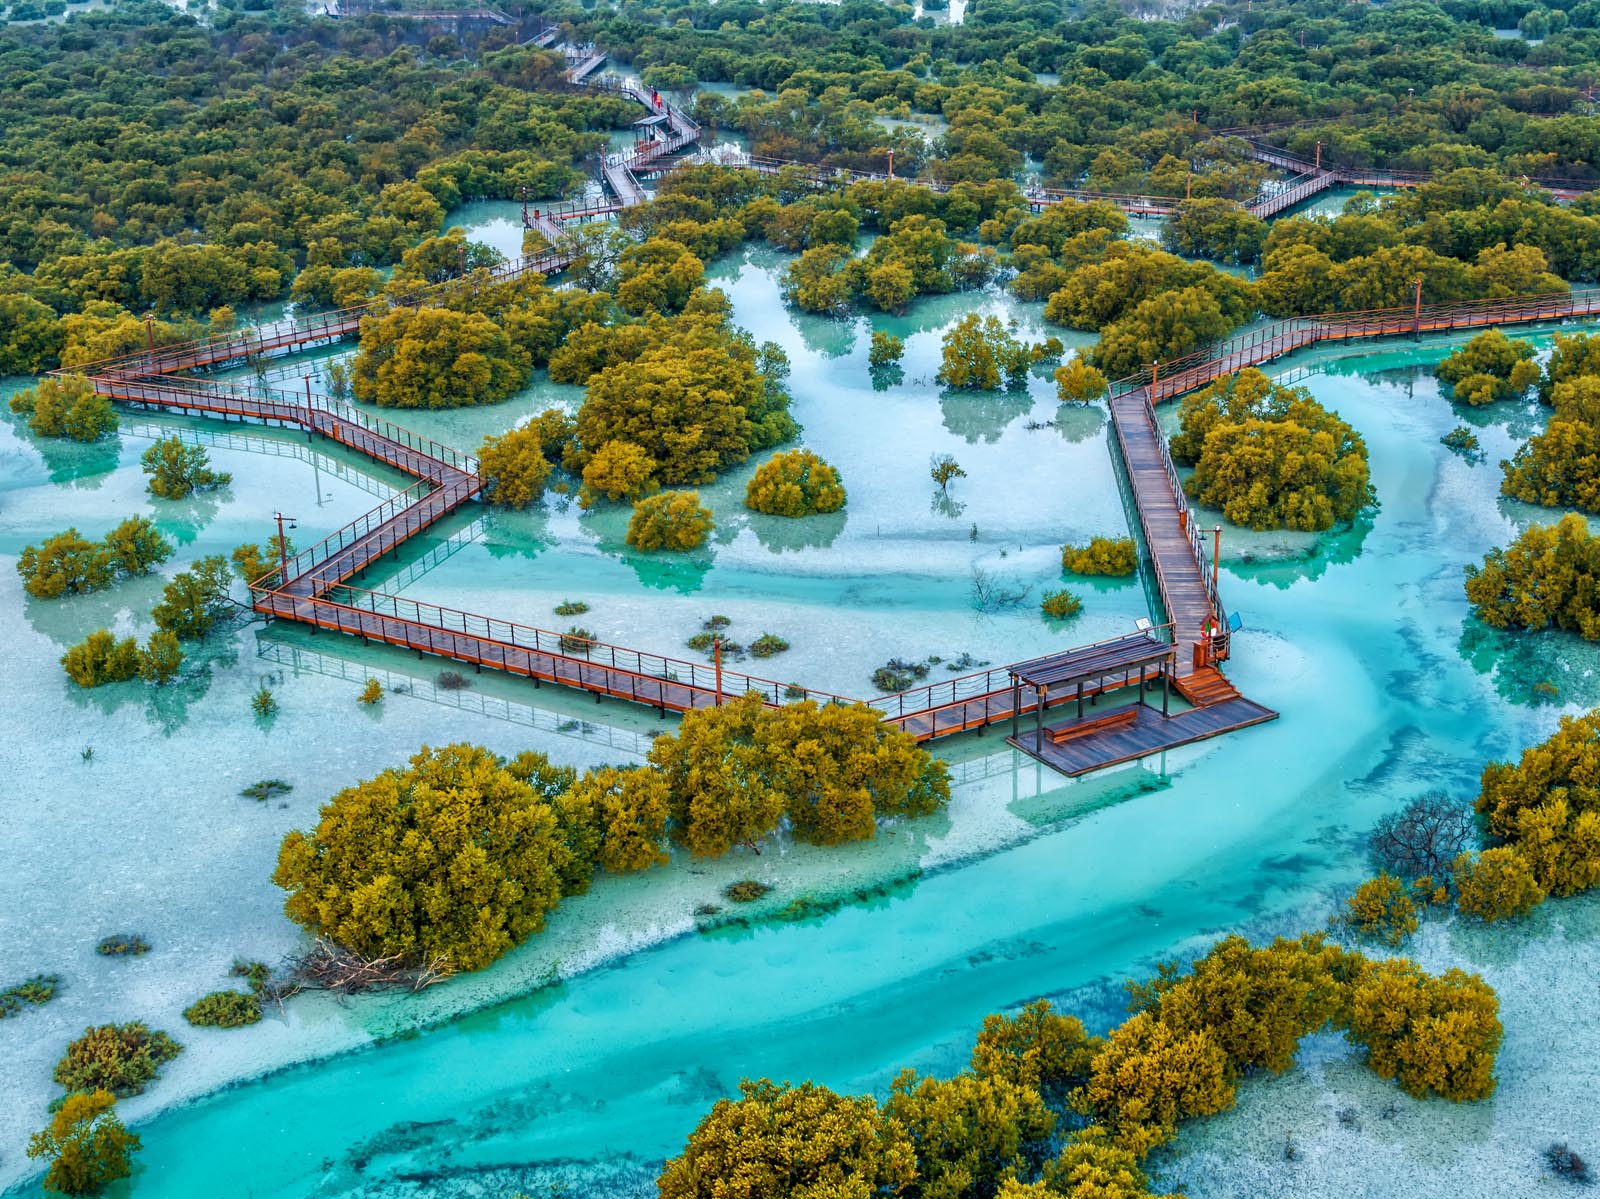 Since 2020, EAD has proudly reported a significant success in the ambitious planting of 44 million mangrove trees around the emirate.